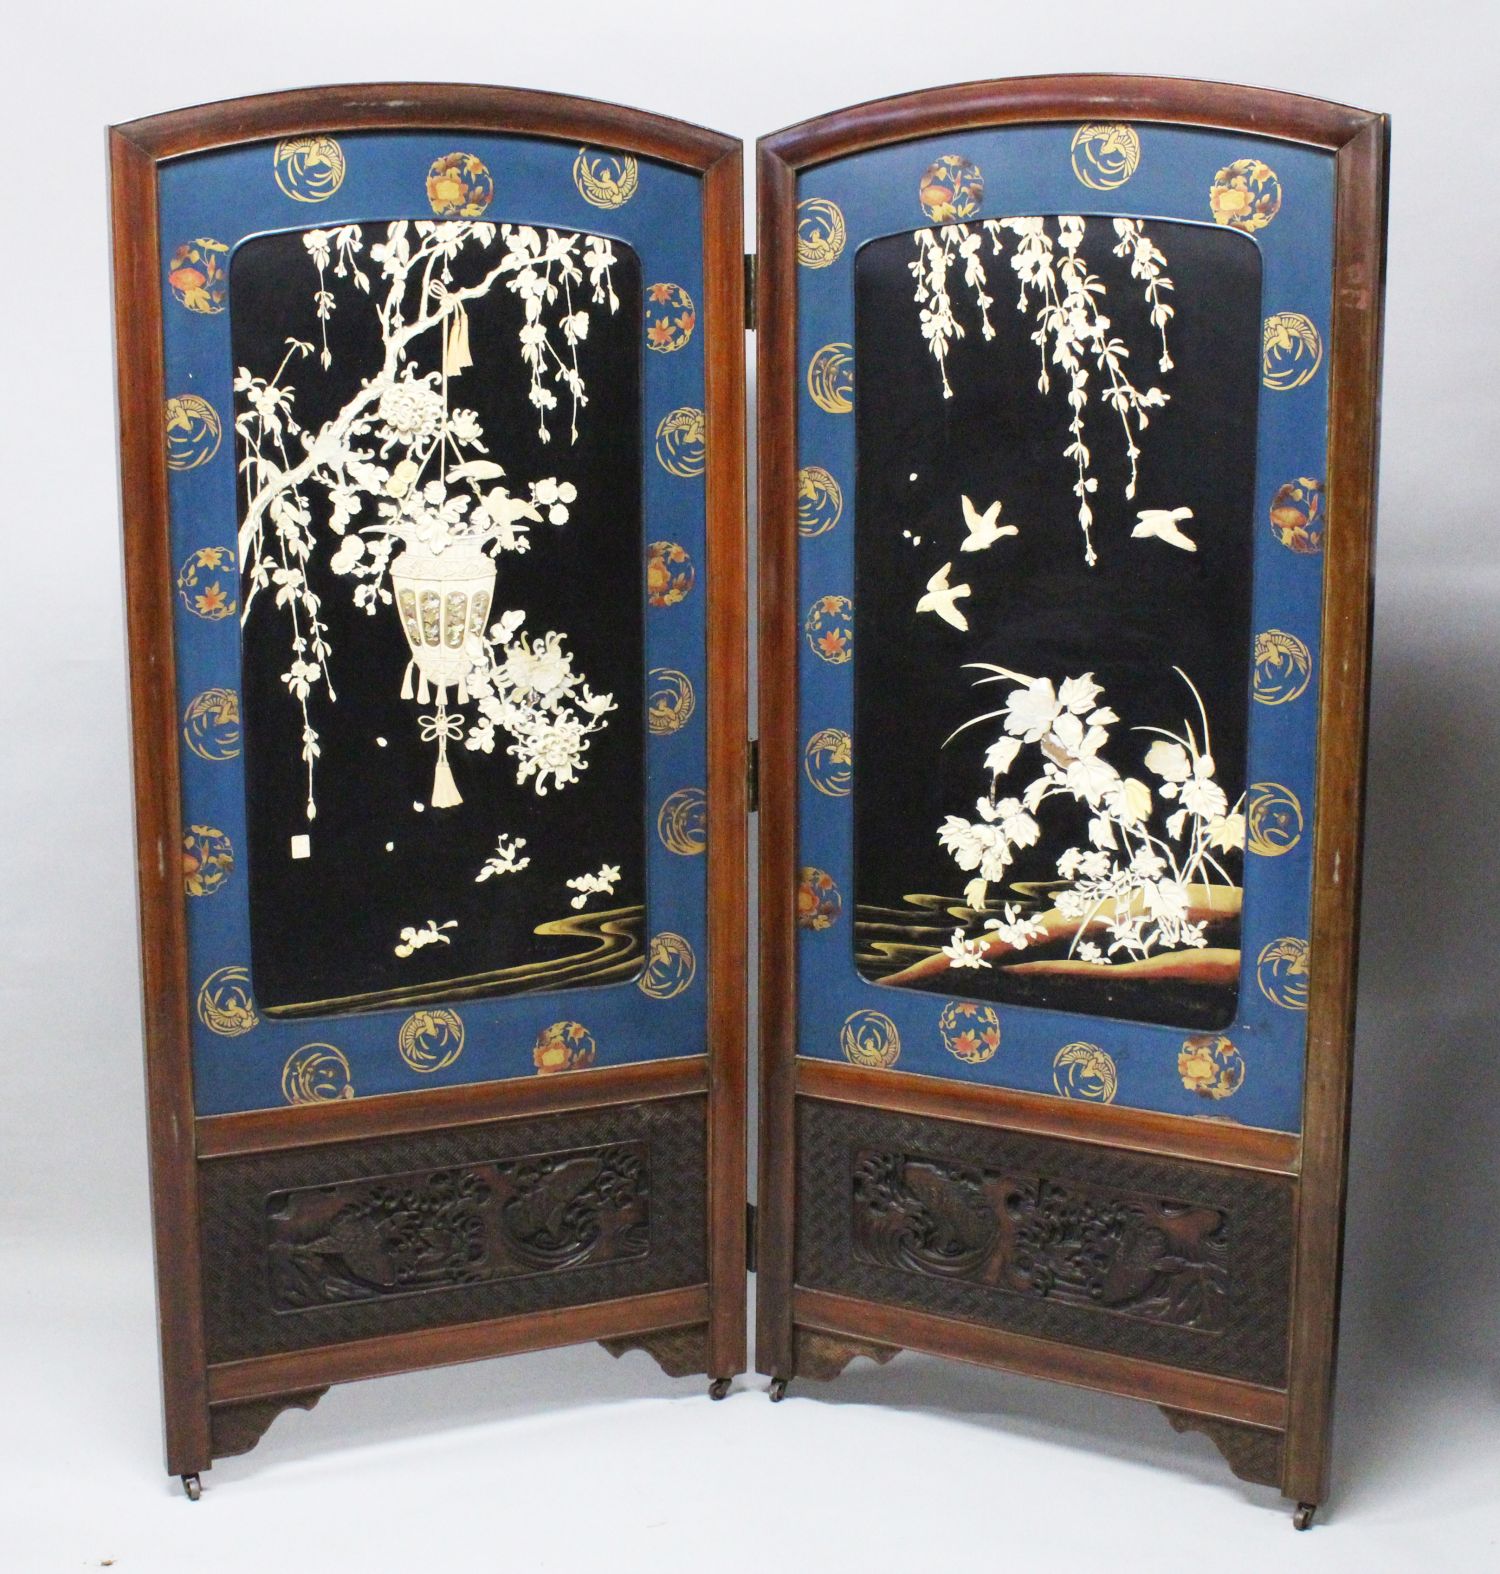 A LARGE JAPANESE MEIJI PERIOD TWO-FOLD HARDWOOD & SHIBAYAMA SCREEN, the panels decorated in high